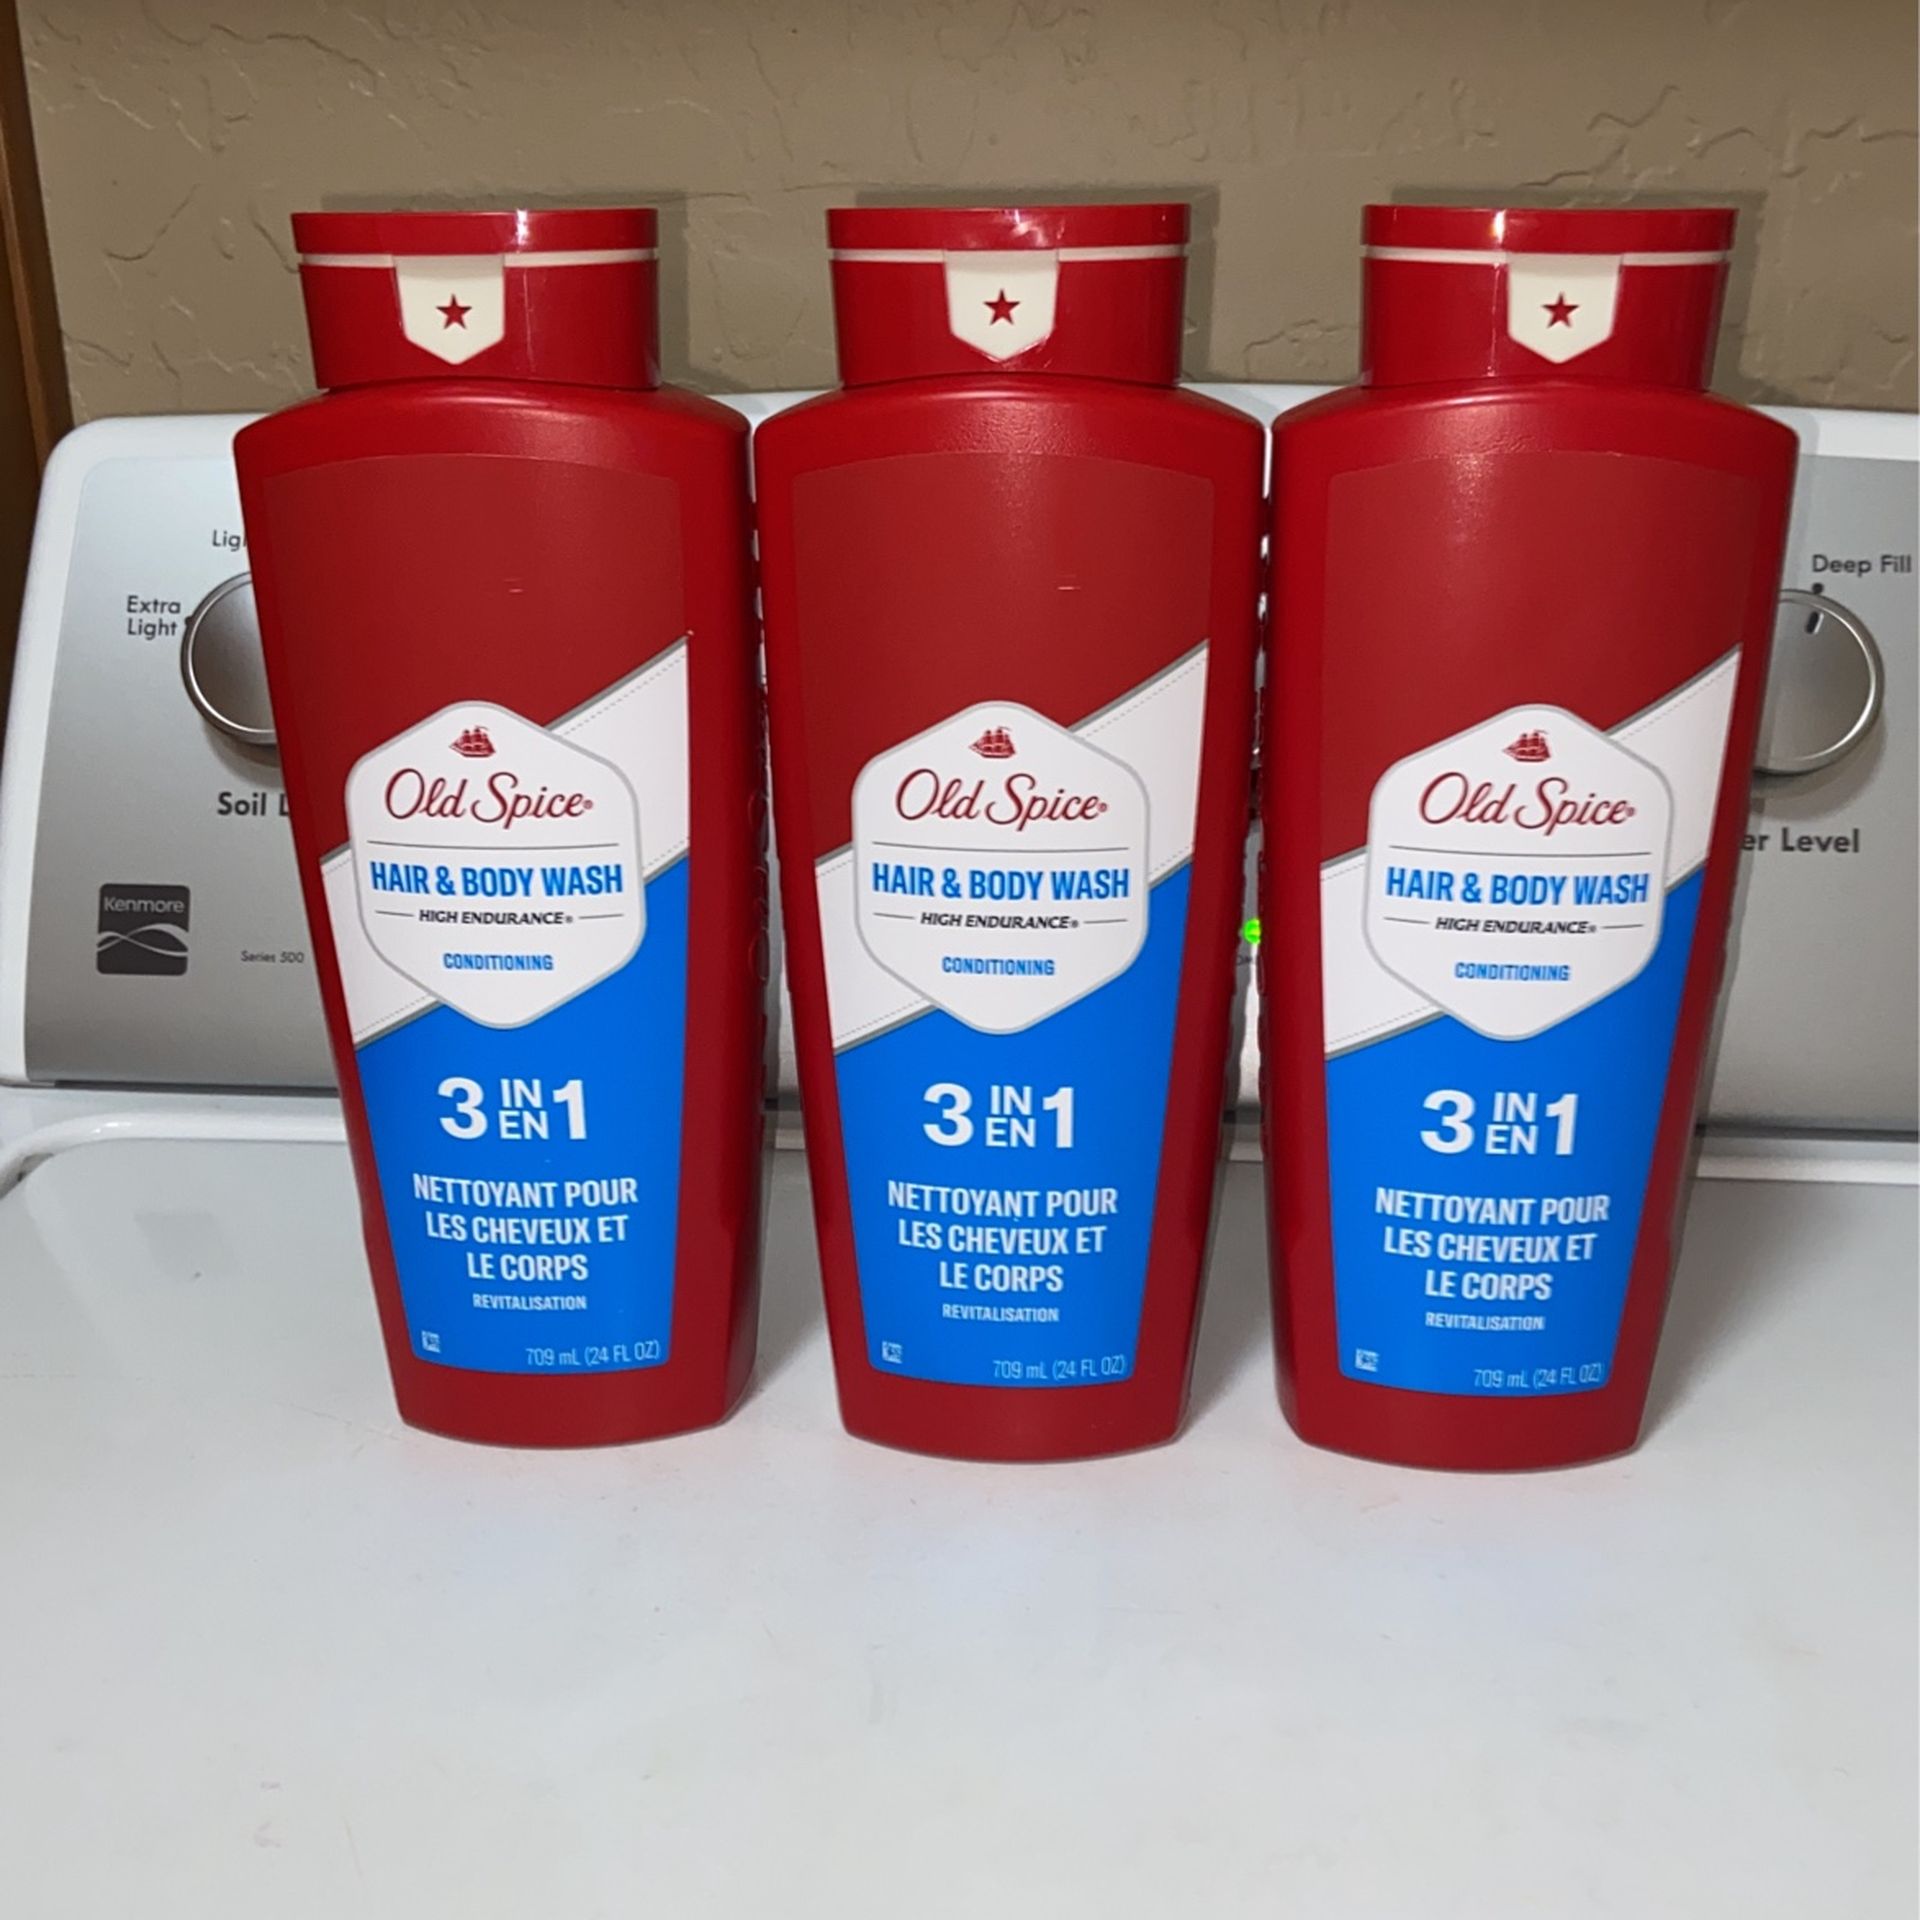 Old Spice 3 in 1 $18.00 for all